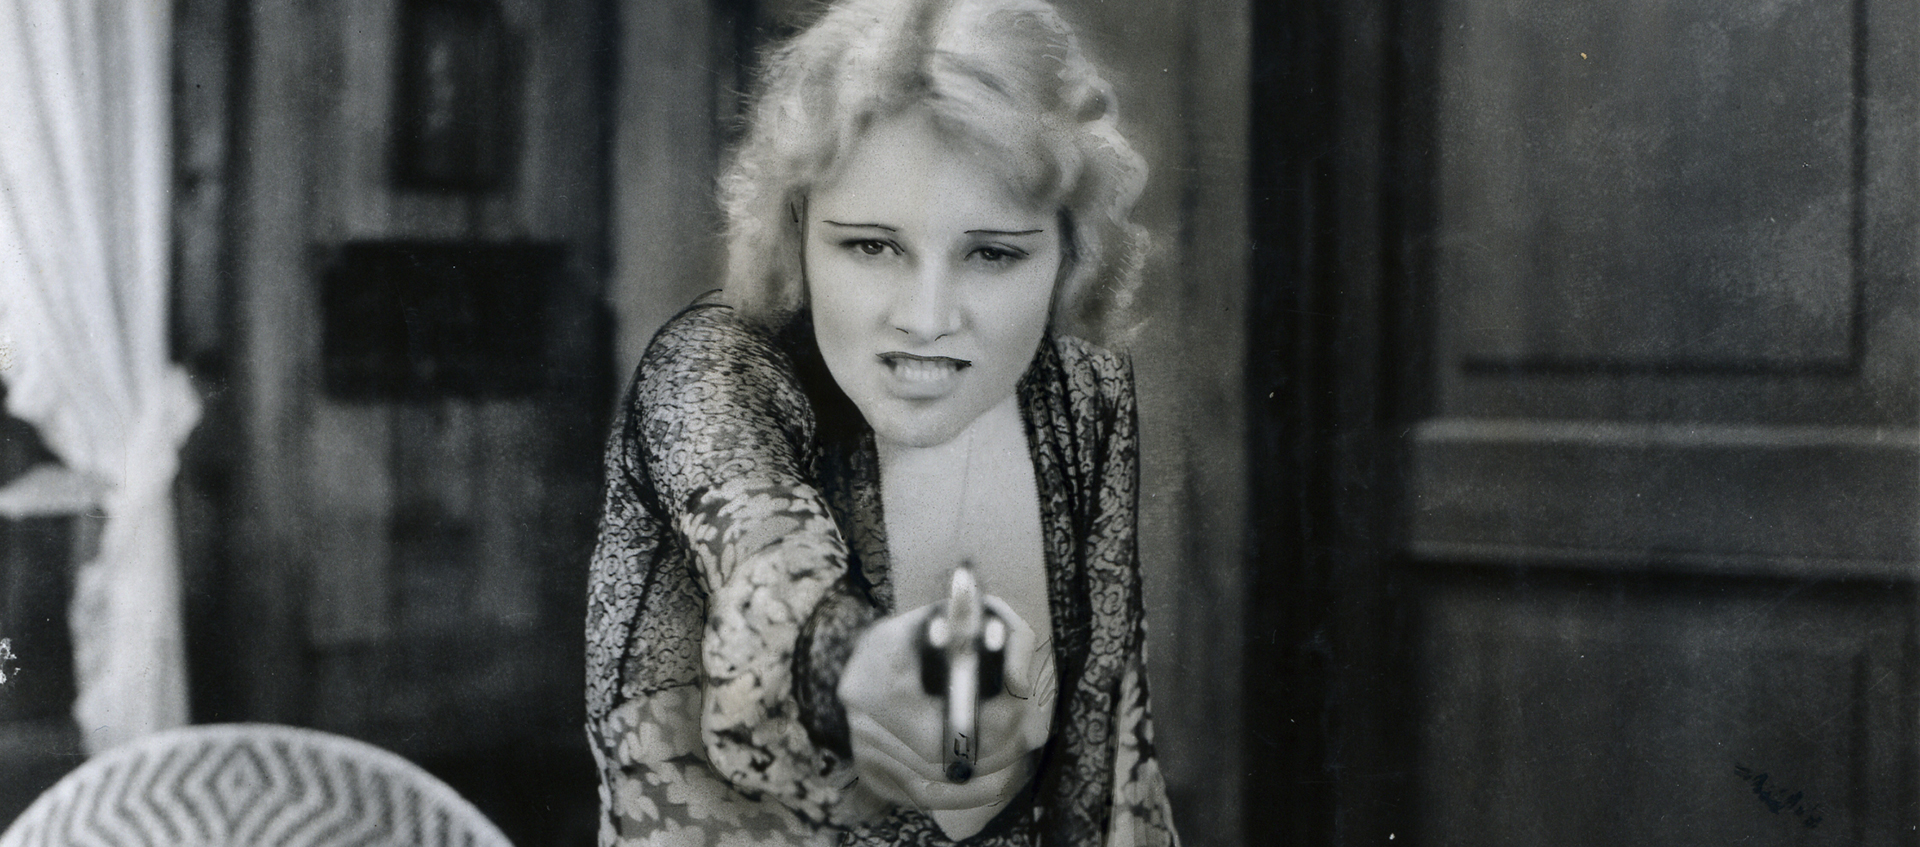 A black and white image of a woman wearing a flowered dress holding a gun.